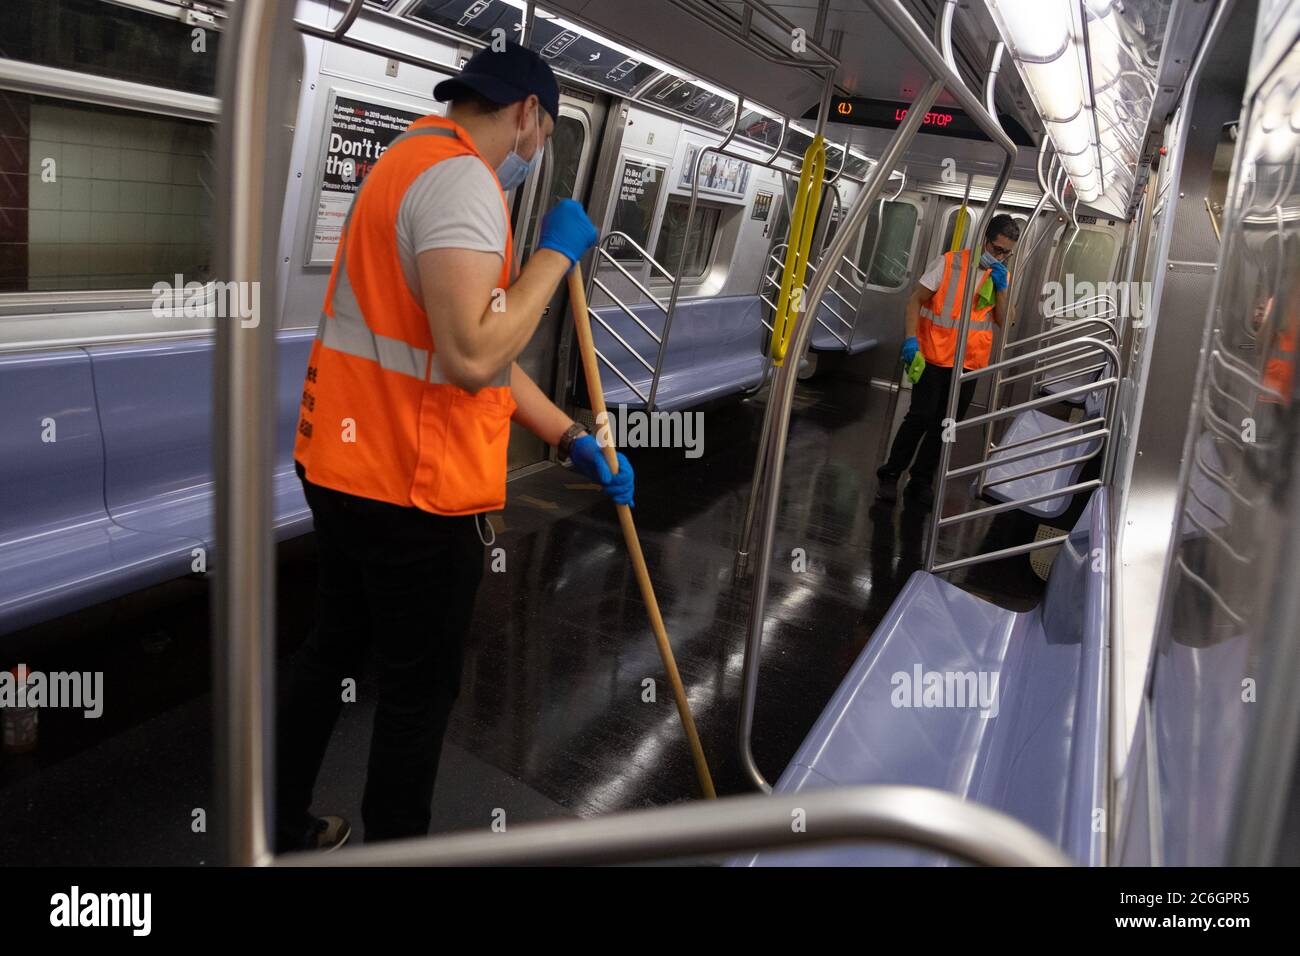 New York, United States. 08th July, 2020. Workers clean inside a subway car in Manhattan as the city enters phase 3 of reopening amid the coronavirus pandemic.As New York City enters phase 3 of reopening retail stores for indoor shopping, restaurants have been postponed for indoor dinning. Meanwhile Black Lives Matter protests continue in the city as the Mayor along with a group of people painted a large Black Lives Matter mural in front of Trump Tower on 5th Ave. Credit: SOPA Images Limited/Alamy Live News Stock Photo